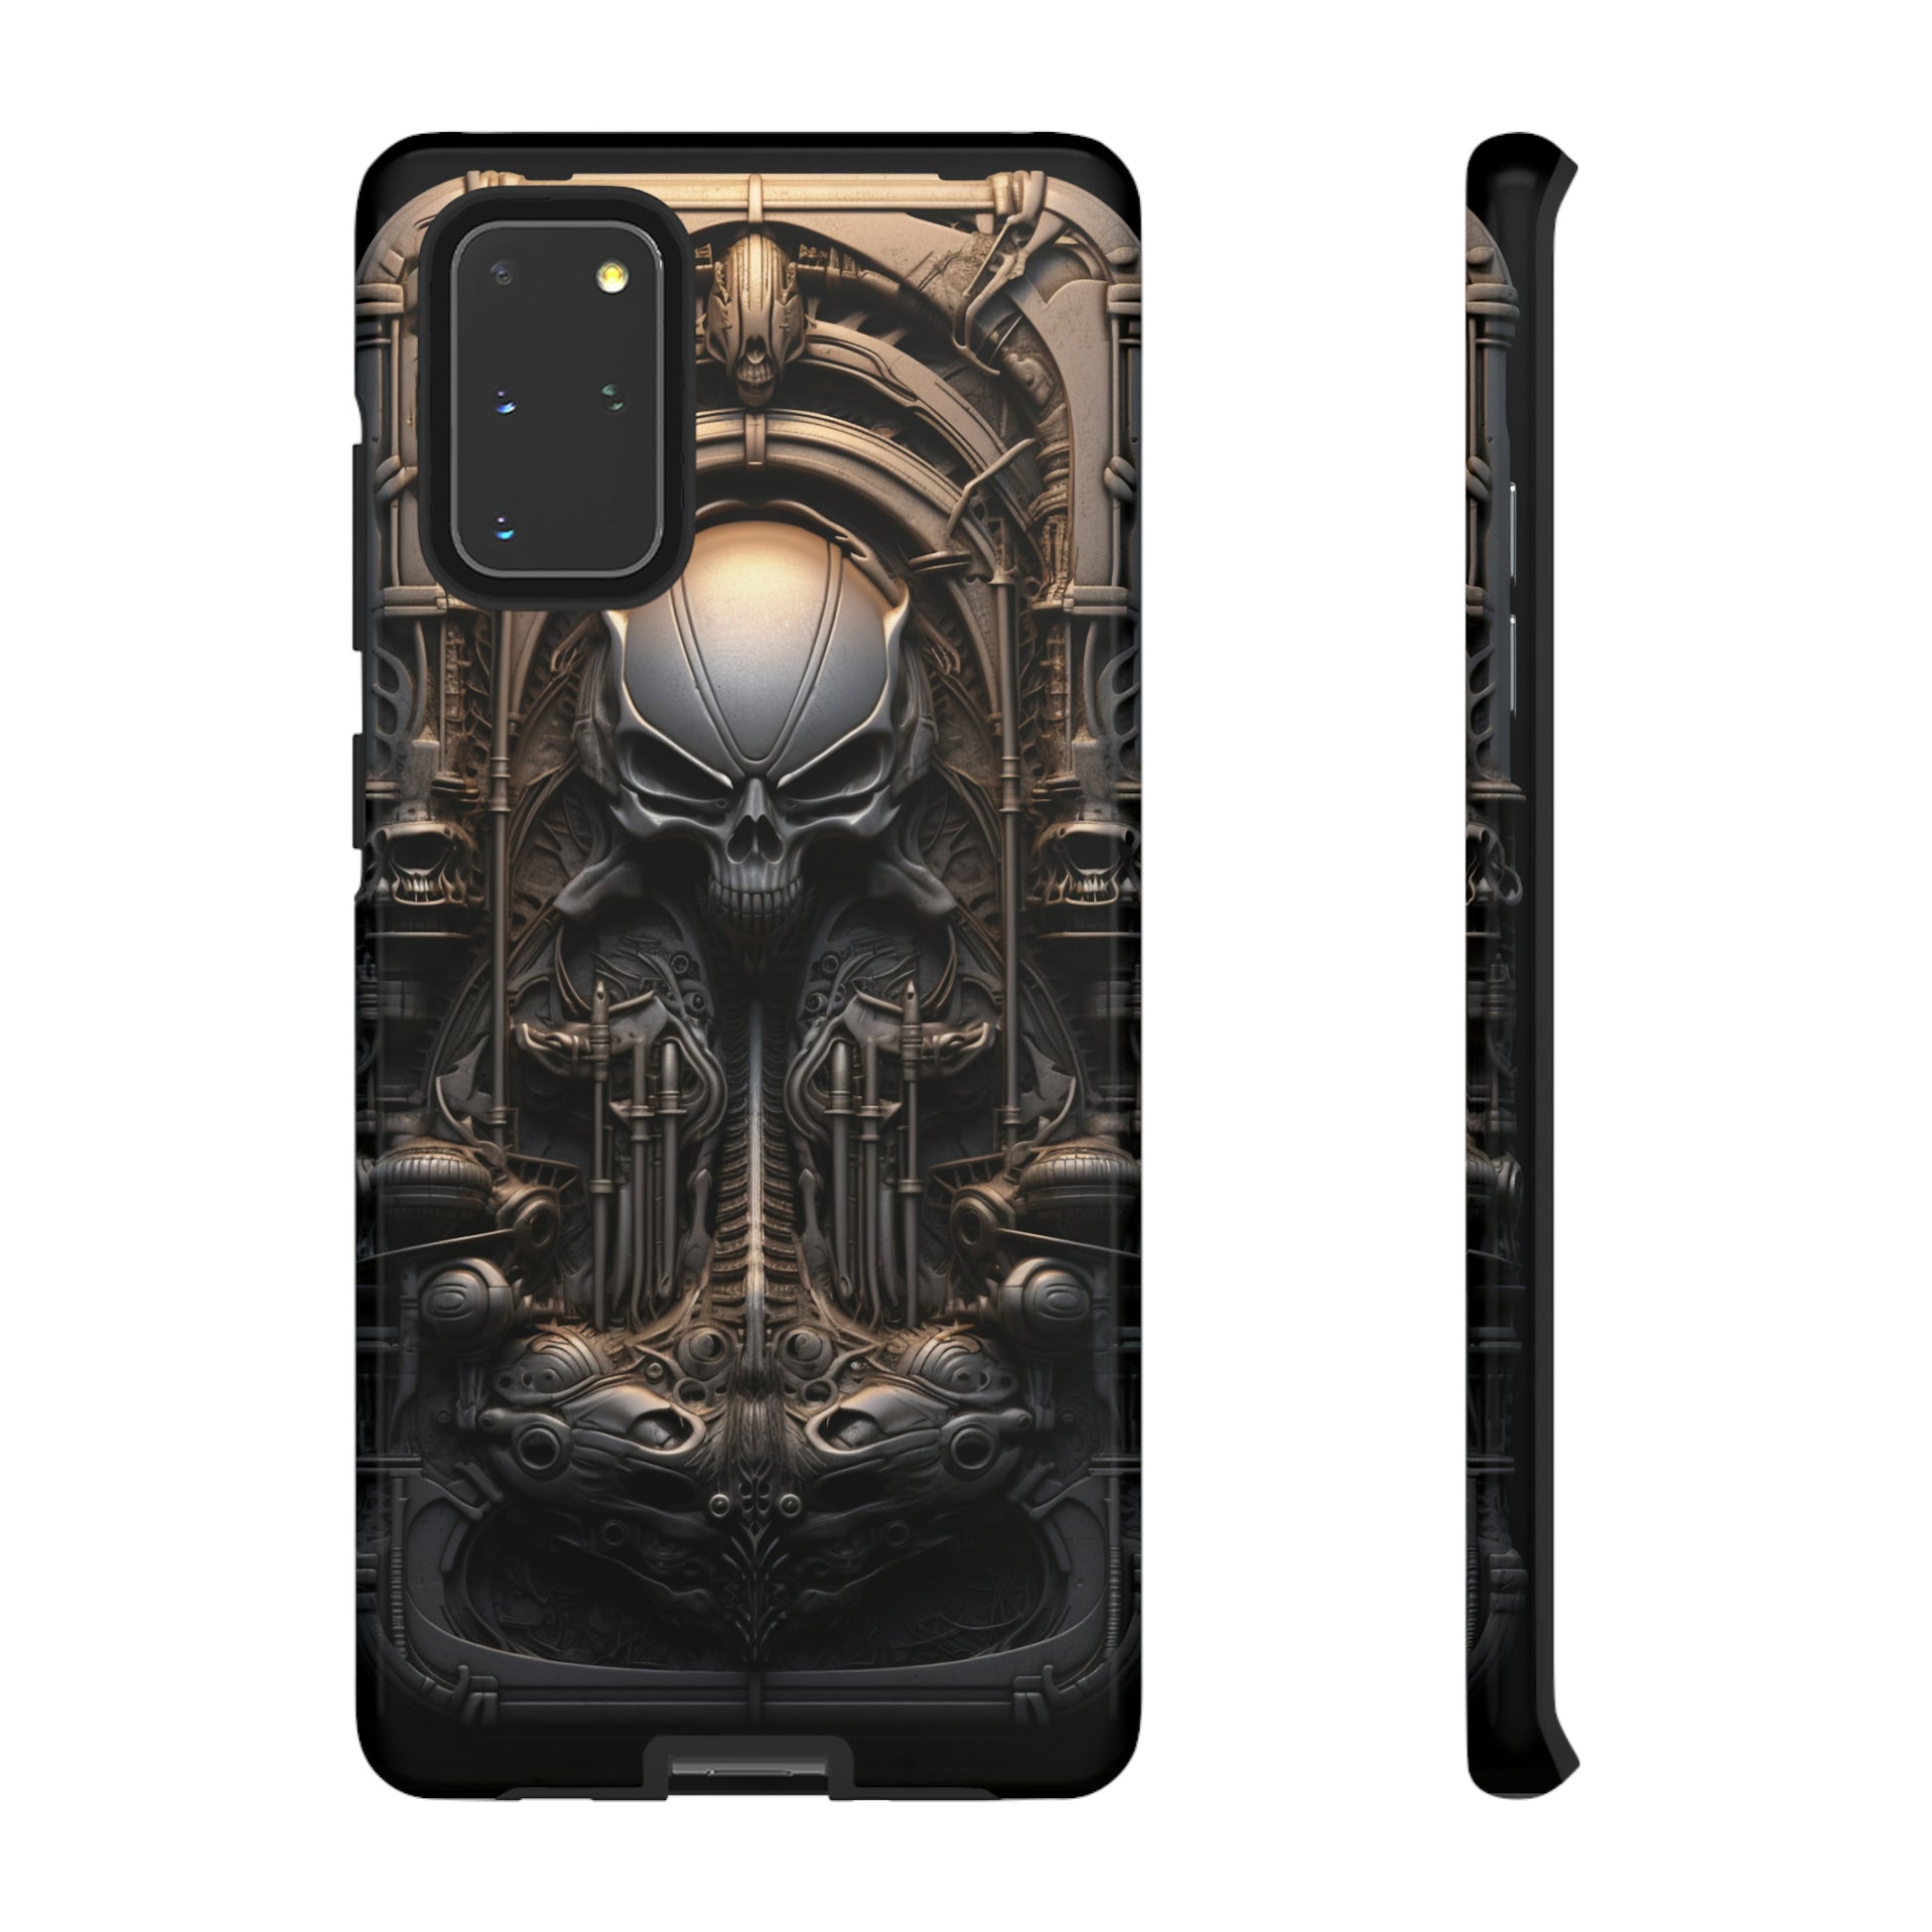 Surreal Giger art cover for Samsung Galaxy S21